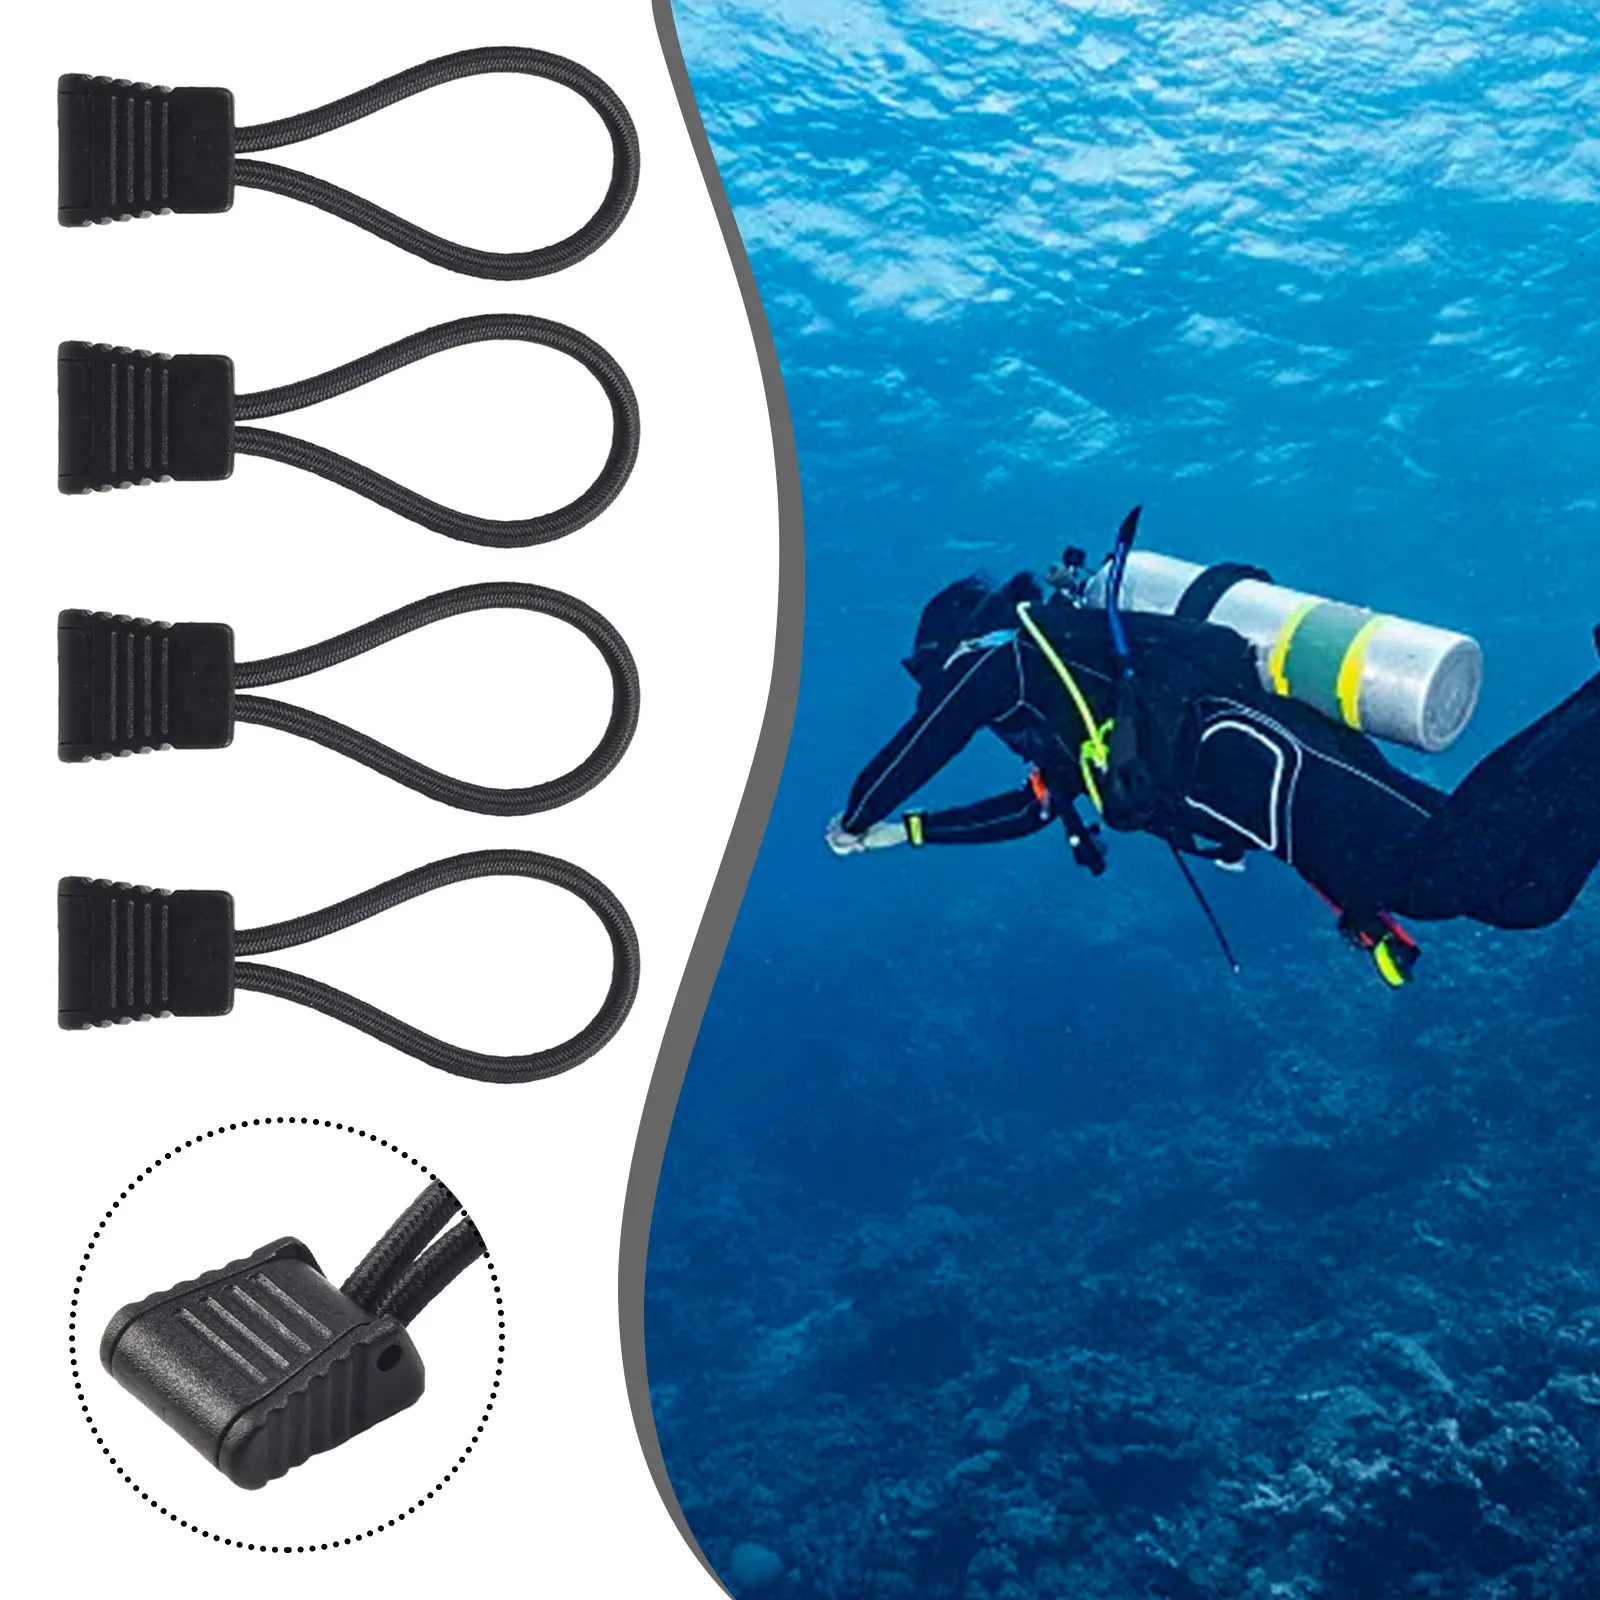 nitescuba diving camera housing handle rope lanyard for scuba diver 4pcs Scuba Diving Hose Retainer Rope Clip Holder Elastic Rope Bungee Diving Snorkel Attachment Rope Dive Diver Accessories Parts